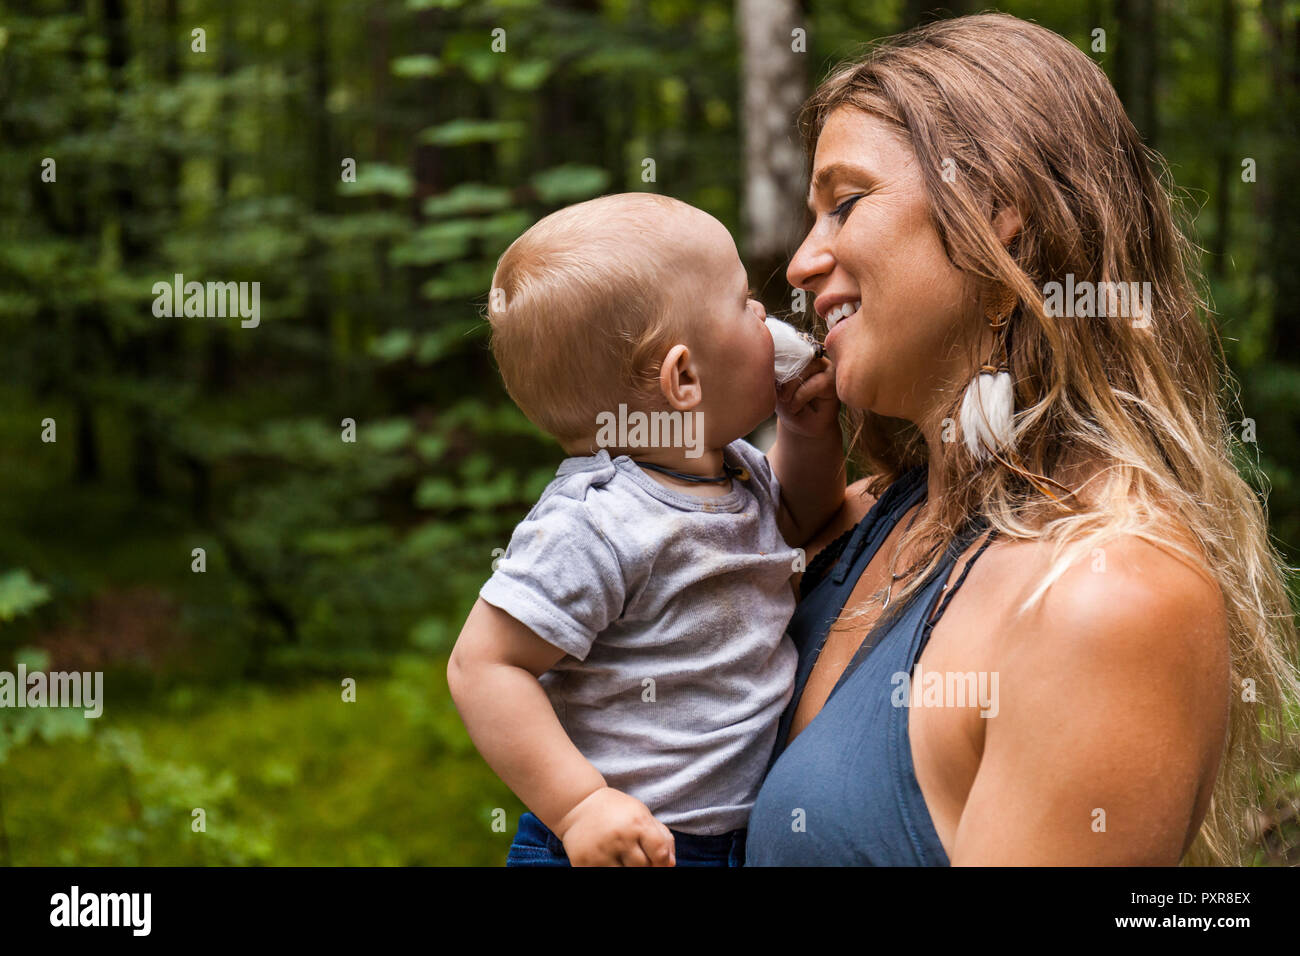 Smiling mother holding baby boy in forest Banque D'Images